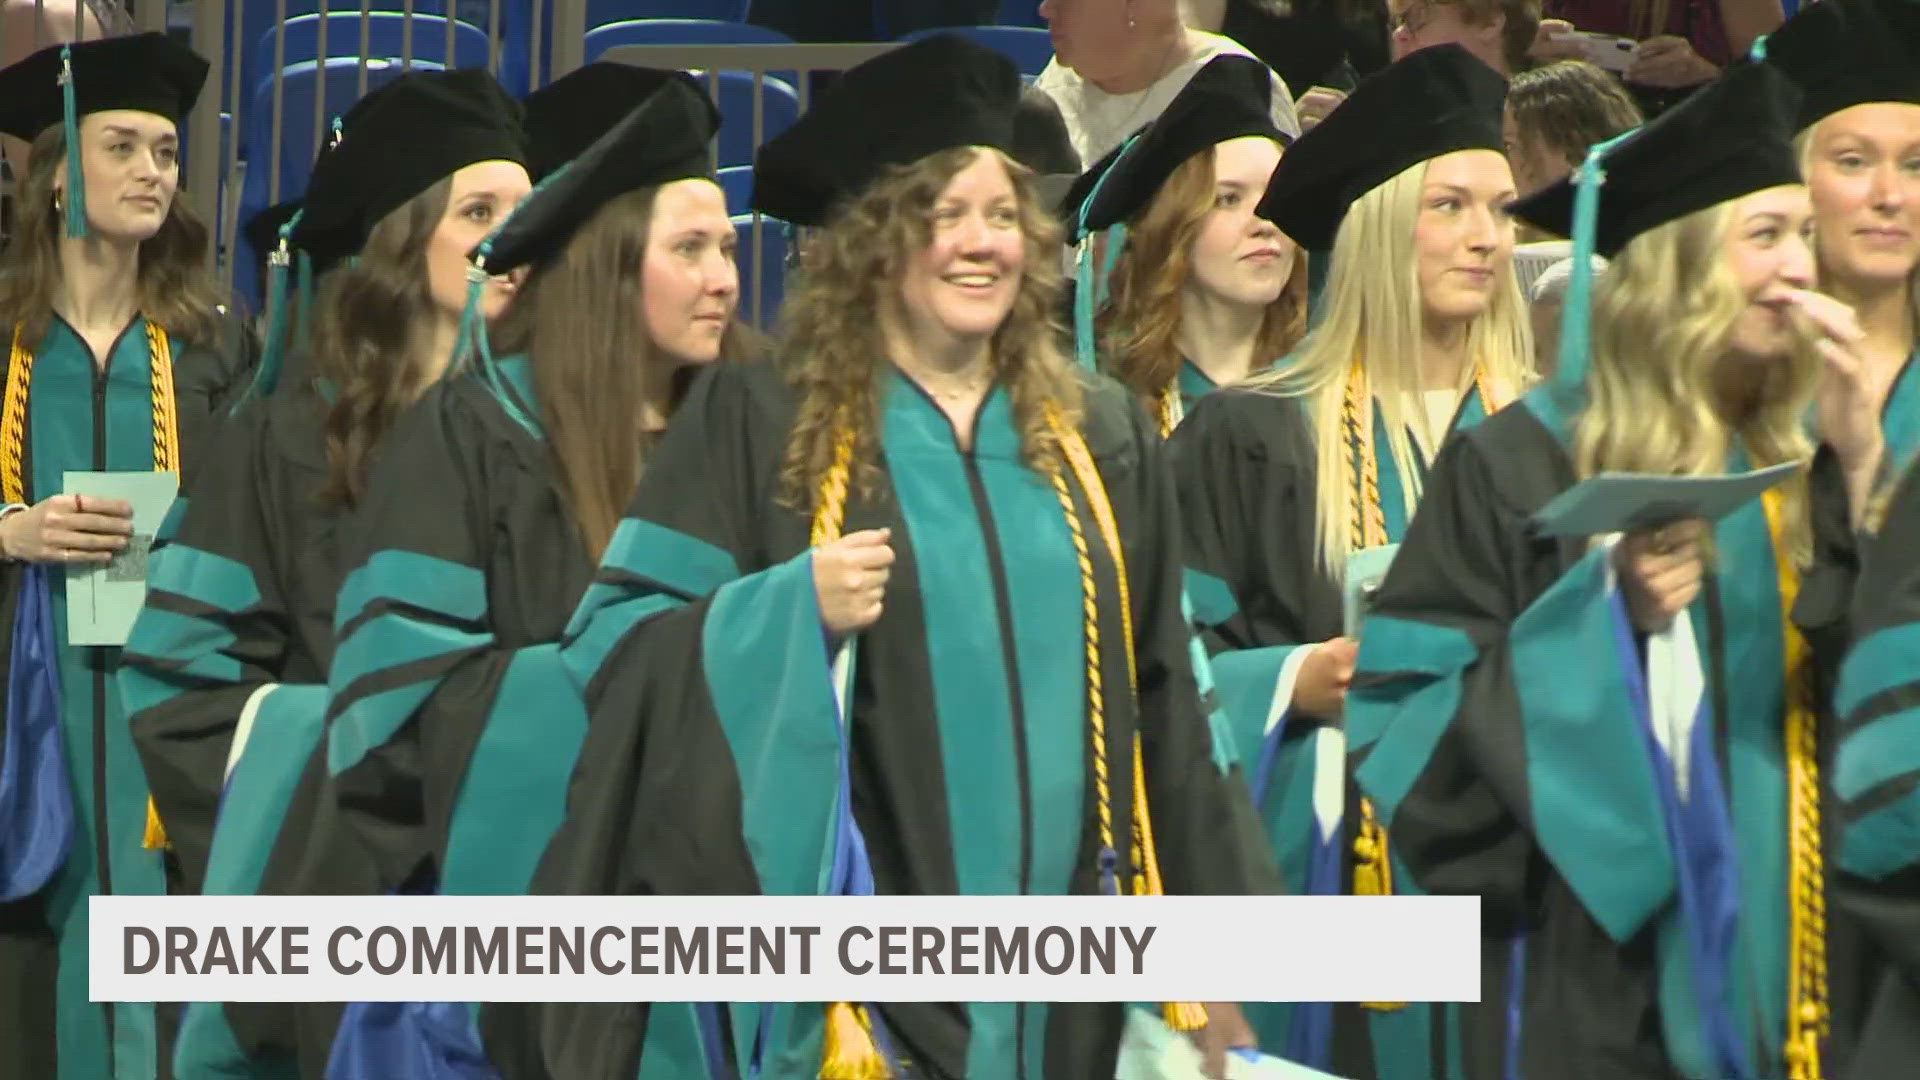 More than 1,100 graduates will walk the stage in the Knapp Center this weekend.